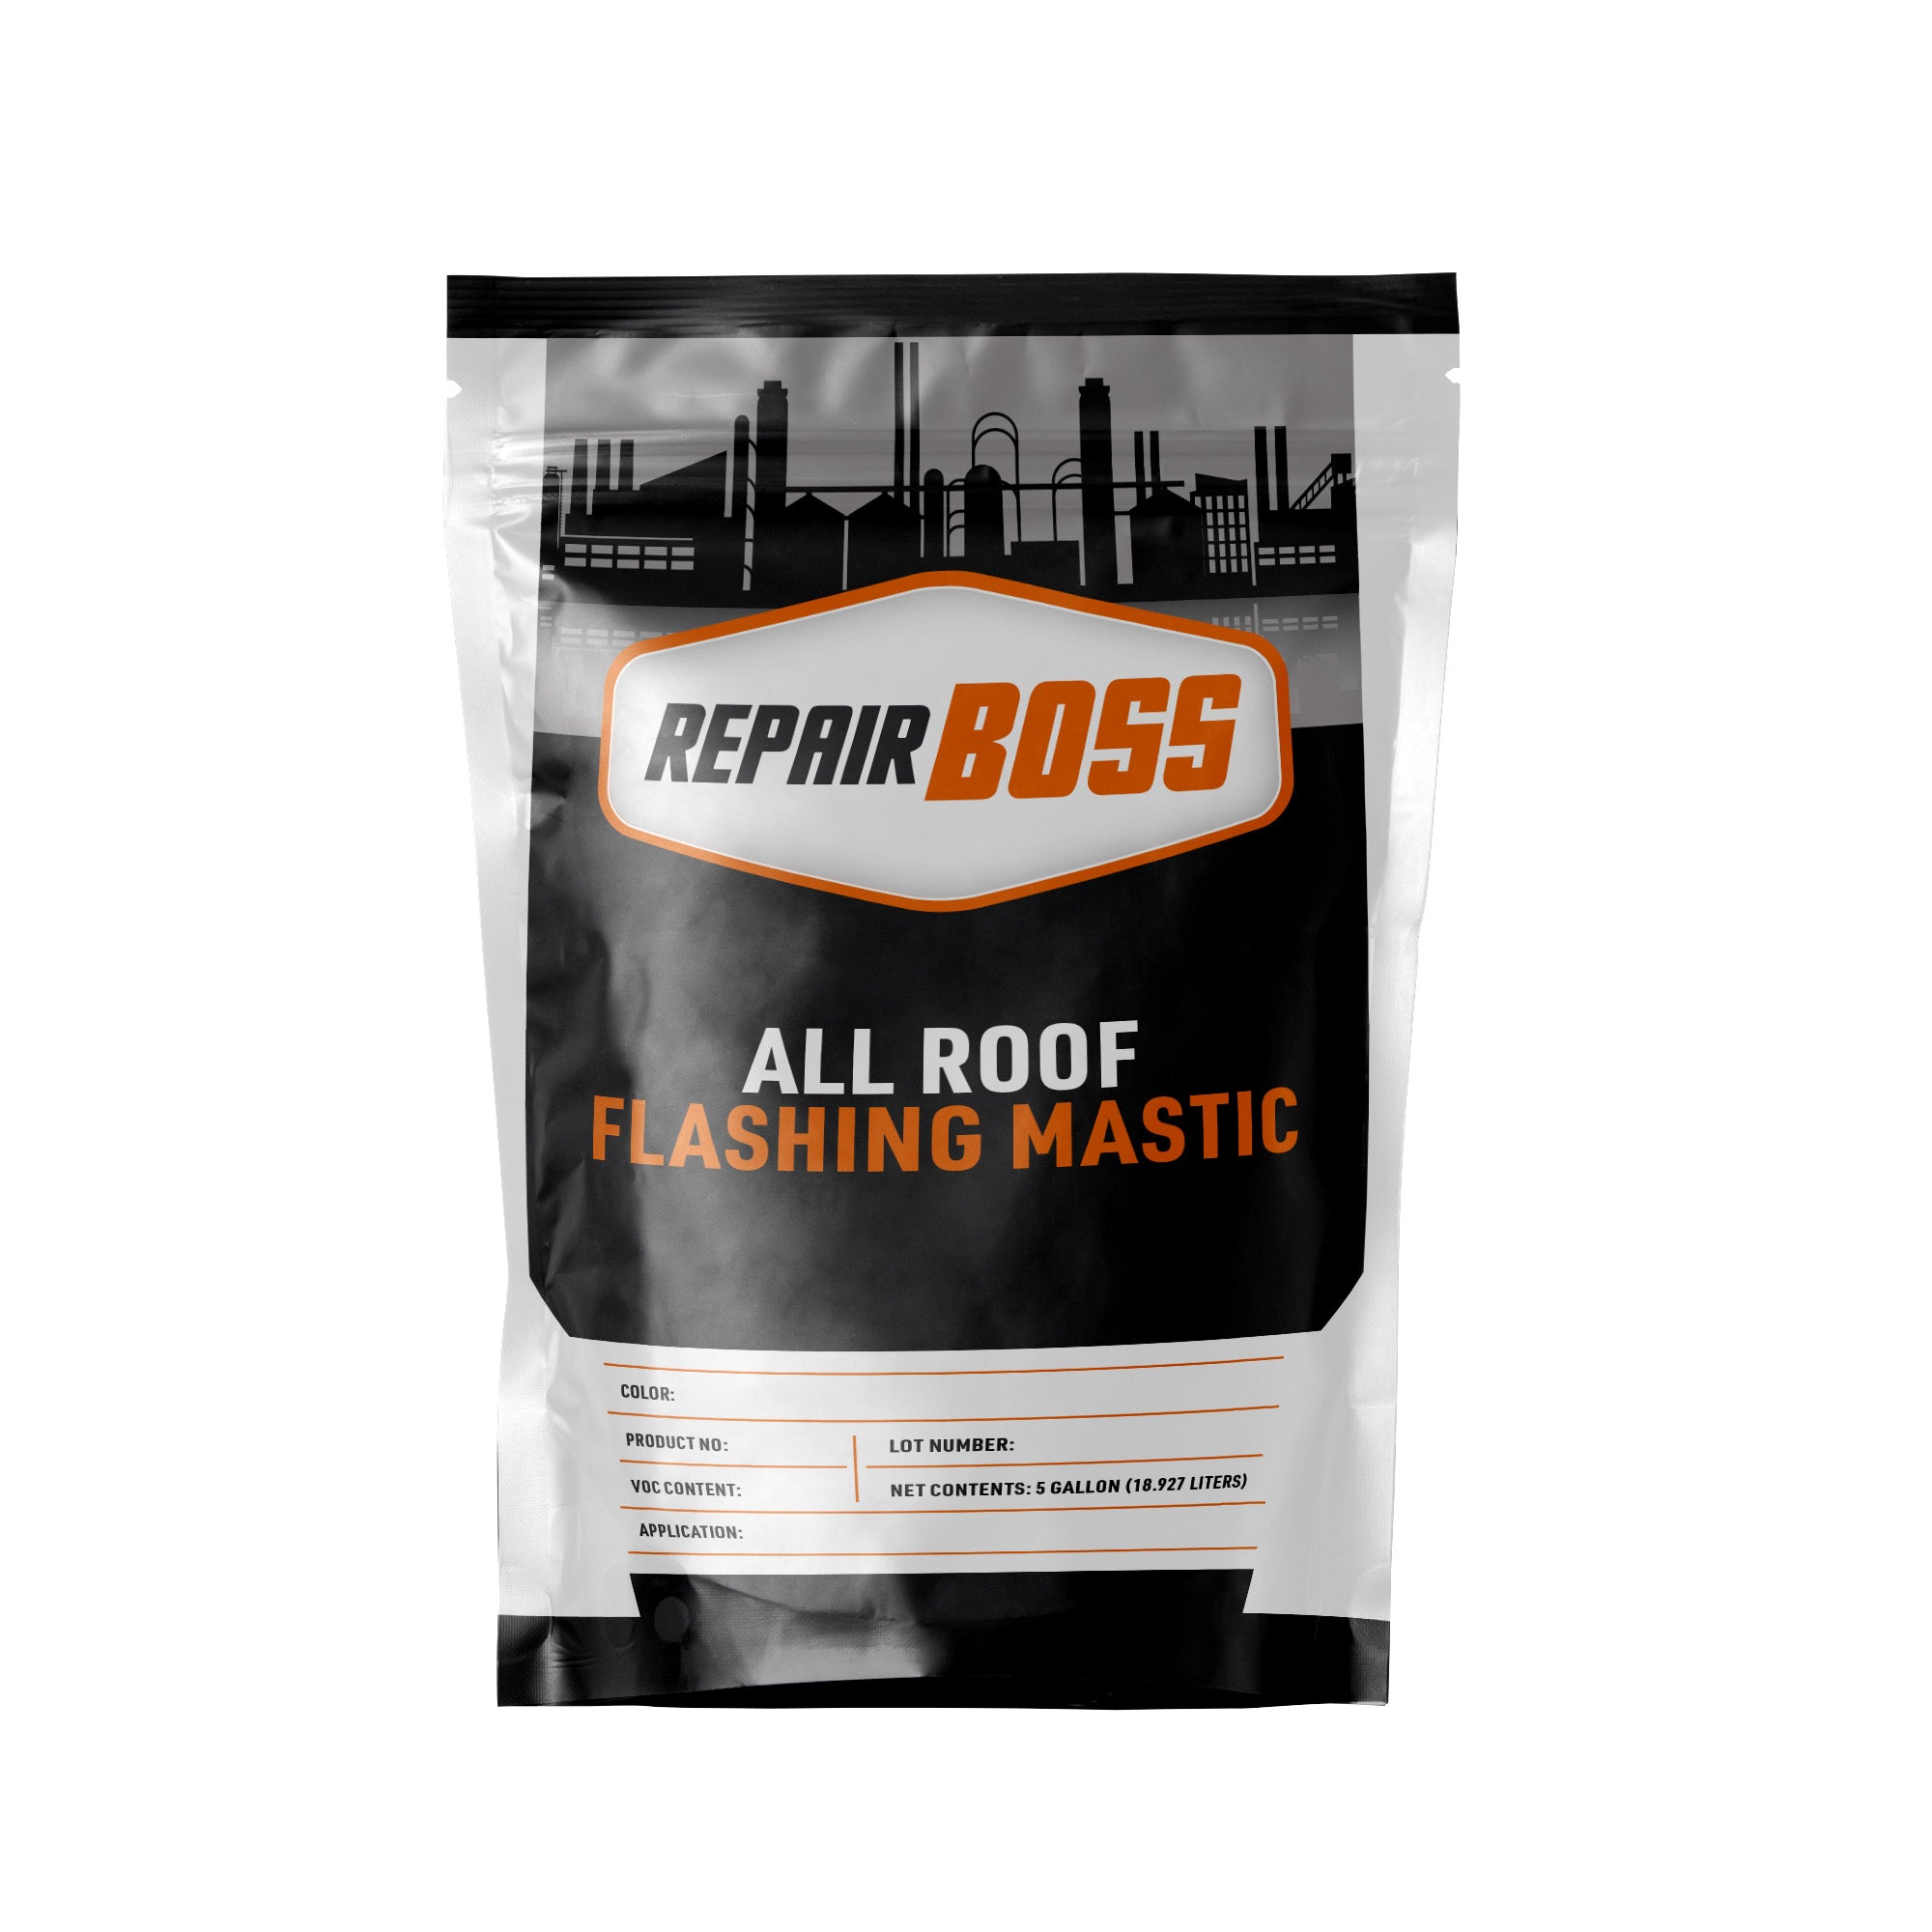 RepairBoss All Roof Flashing Mastic pouch (1/2 gal grey) (8 pouches per case)